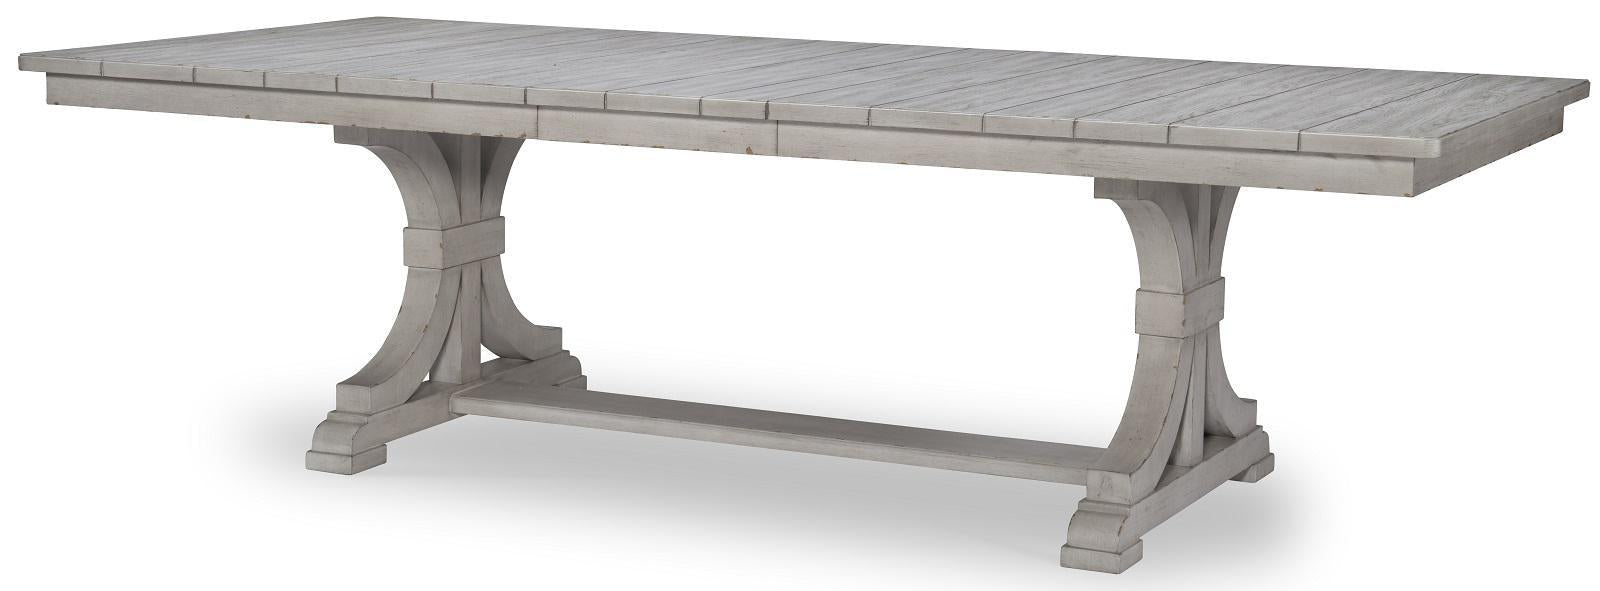 Legacy Classic Belhaven Trestle Table in Weathered Plank